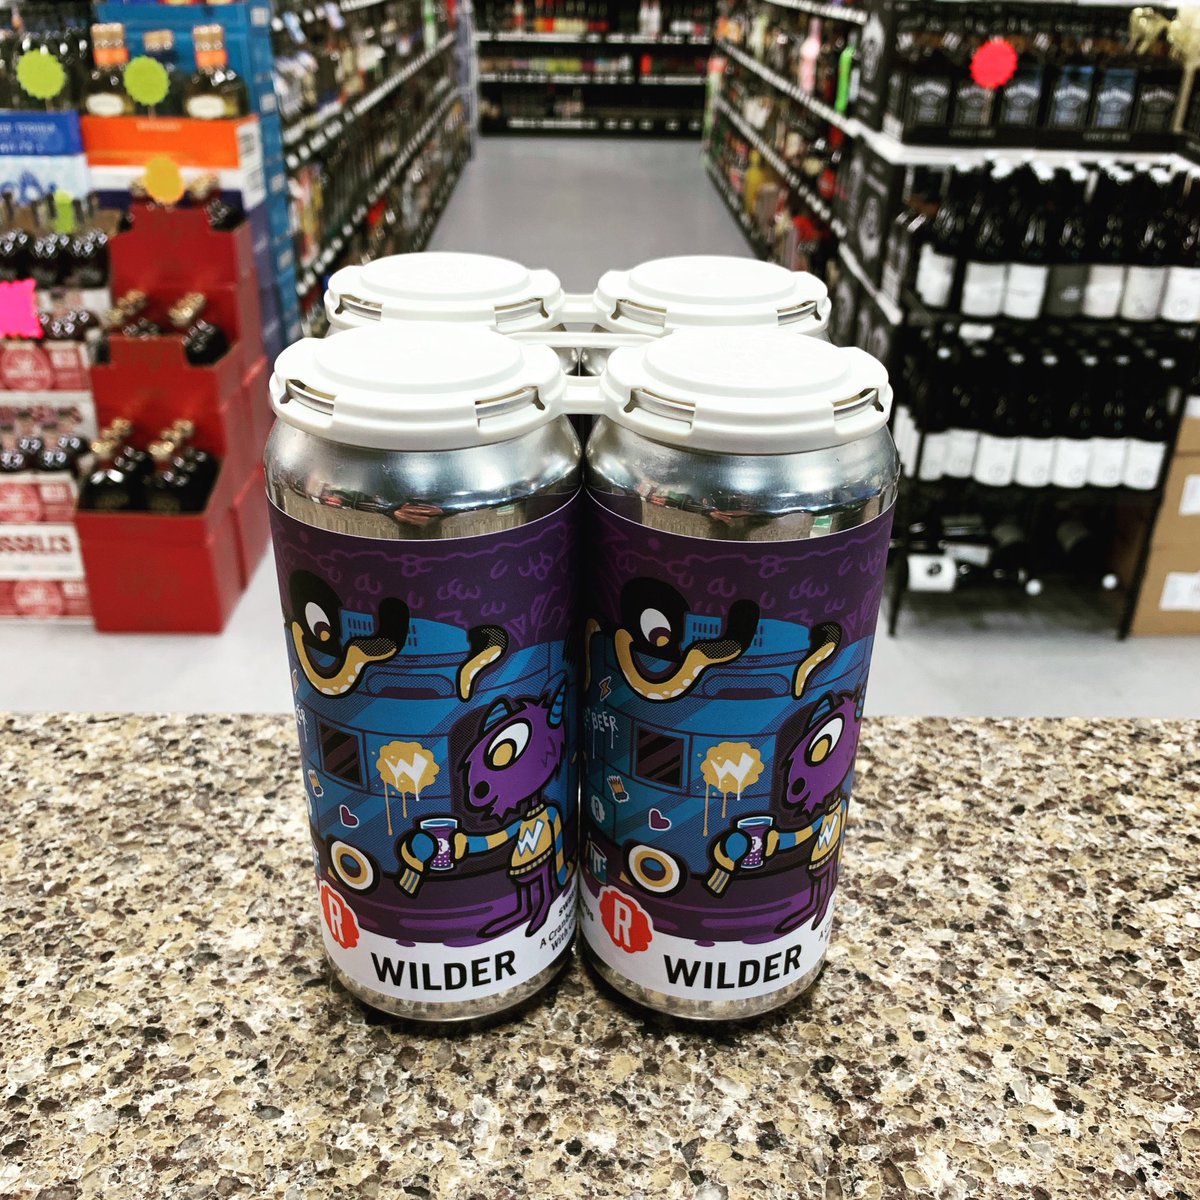 Reformation Wilder now available #drinklocal #gabeer #setbeerfree